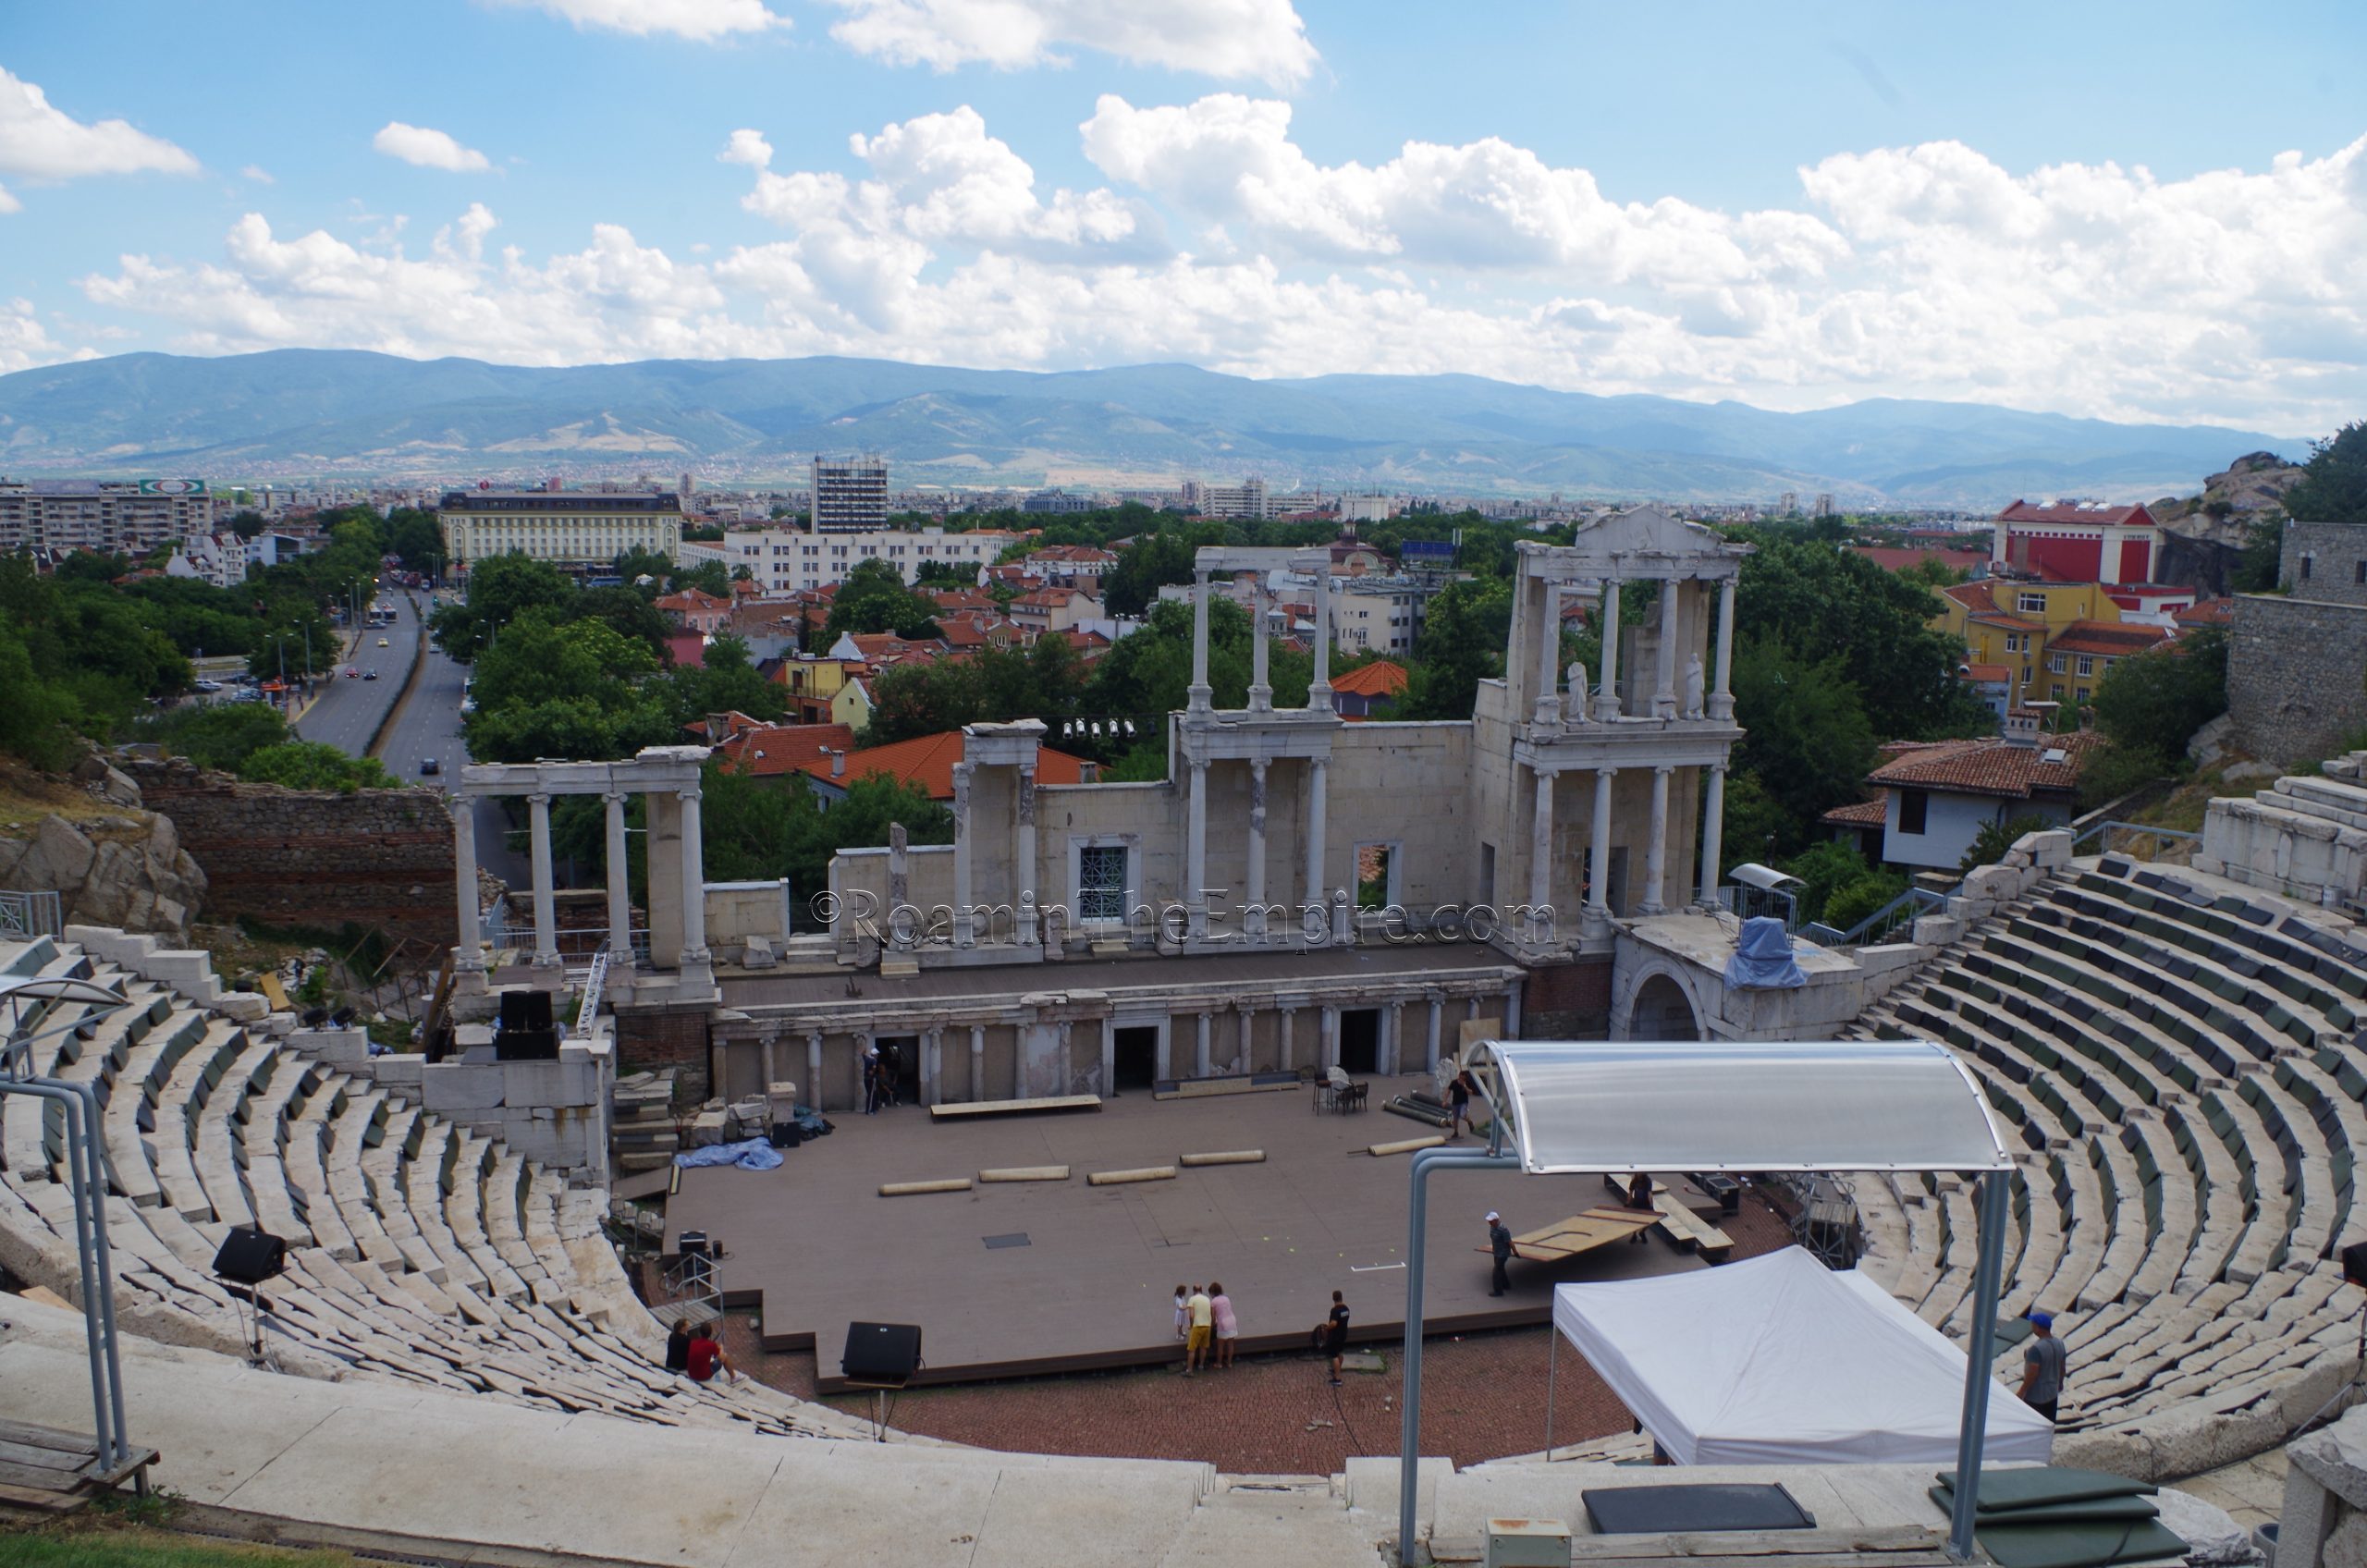 Theater of Philippopolis, meeting place of the koinon (discussed in second post).